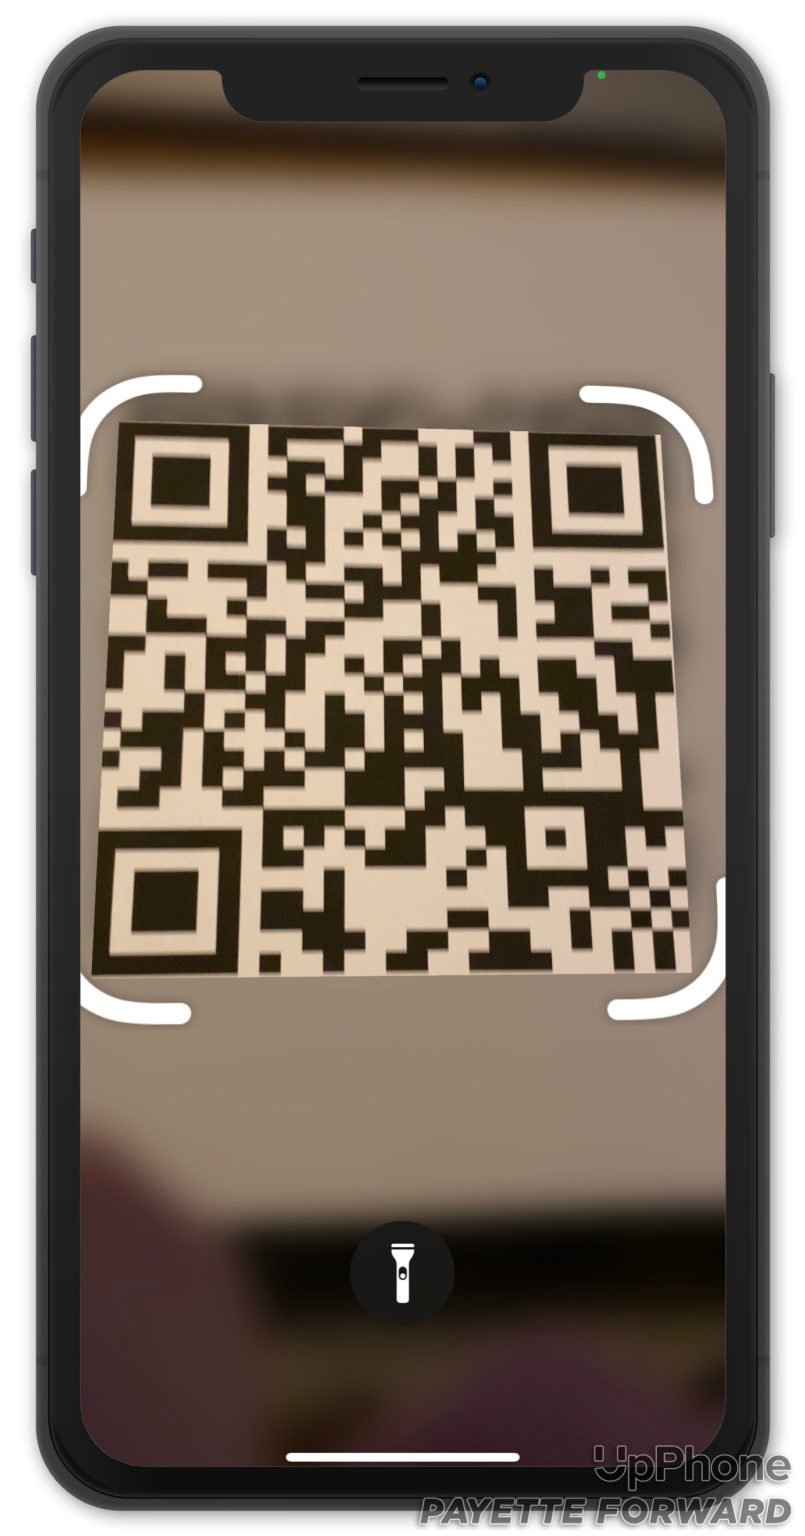 iconfly qr code